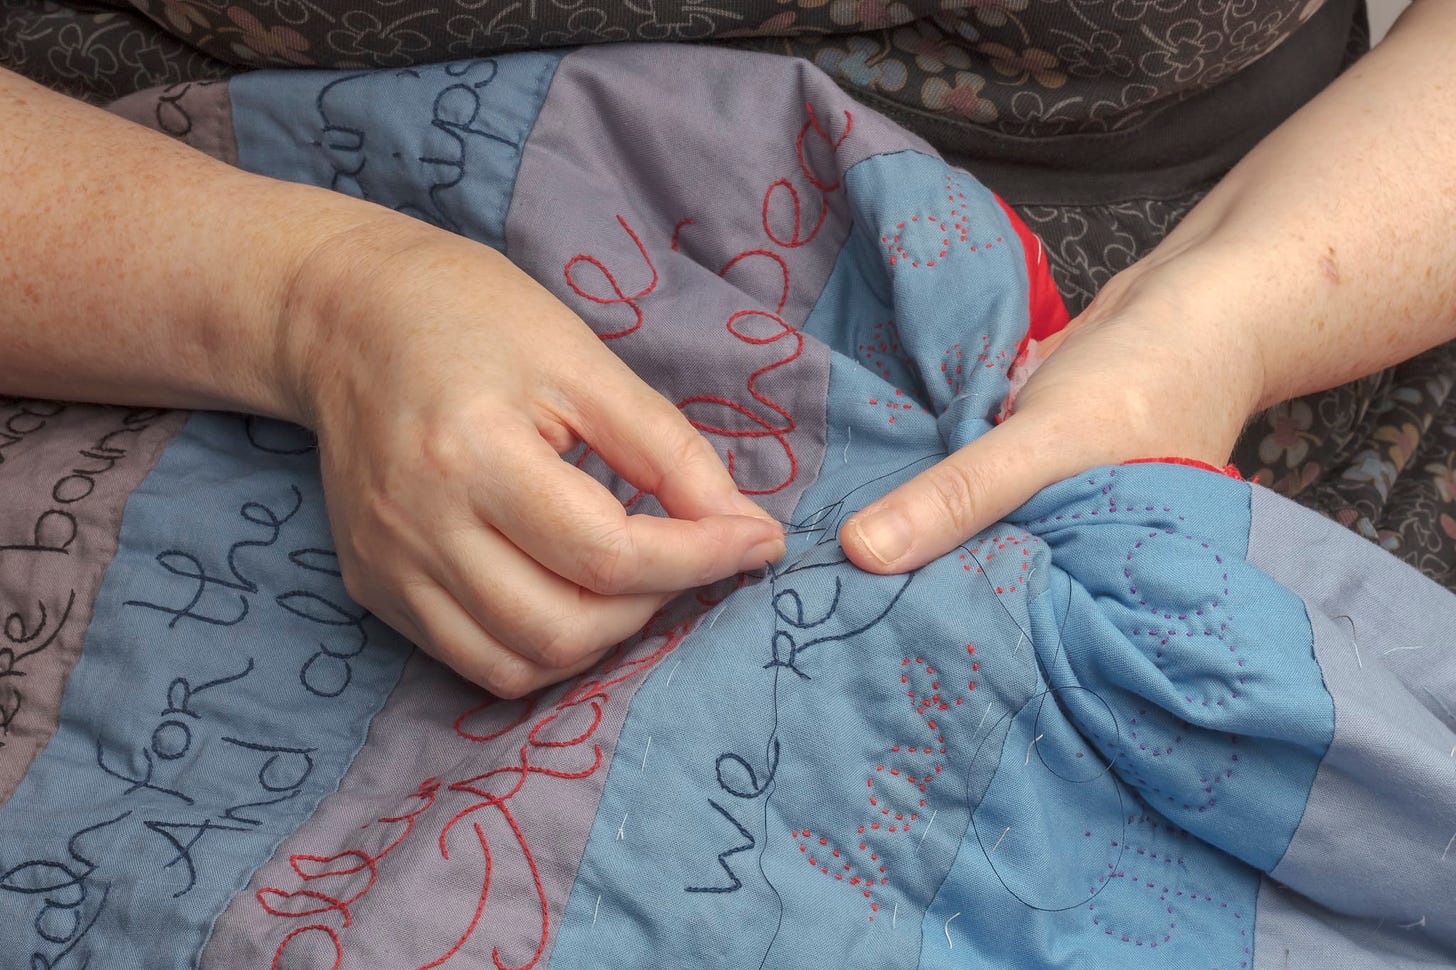 Hand stitching a quilt with needle and thread.